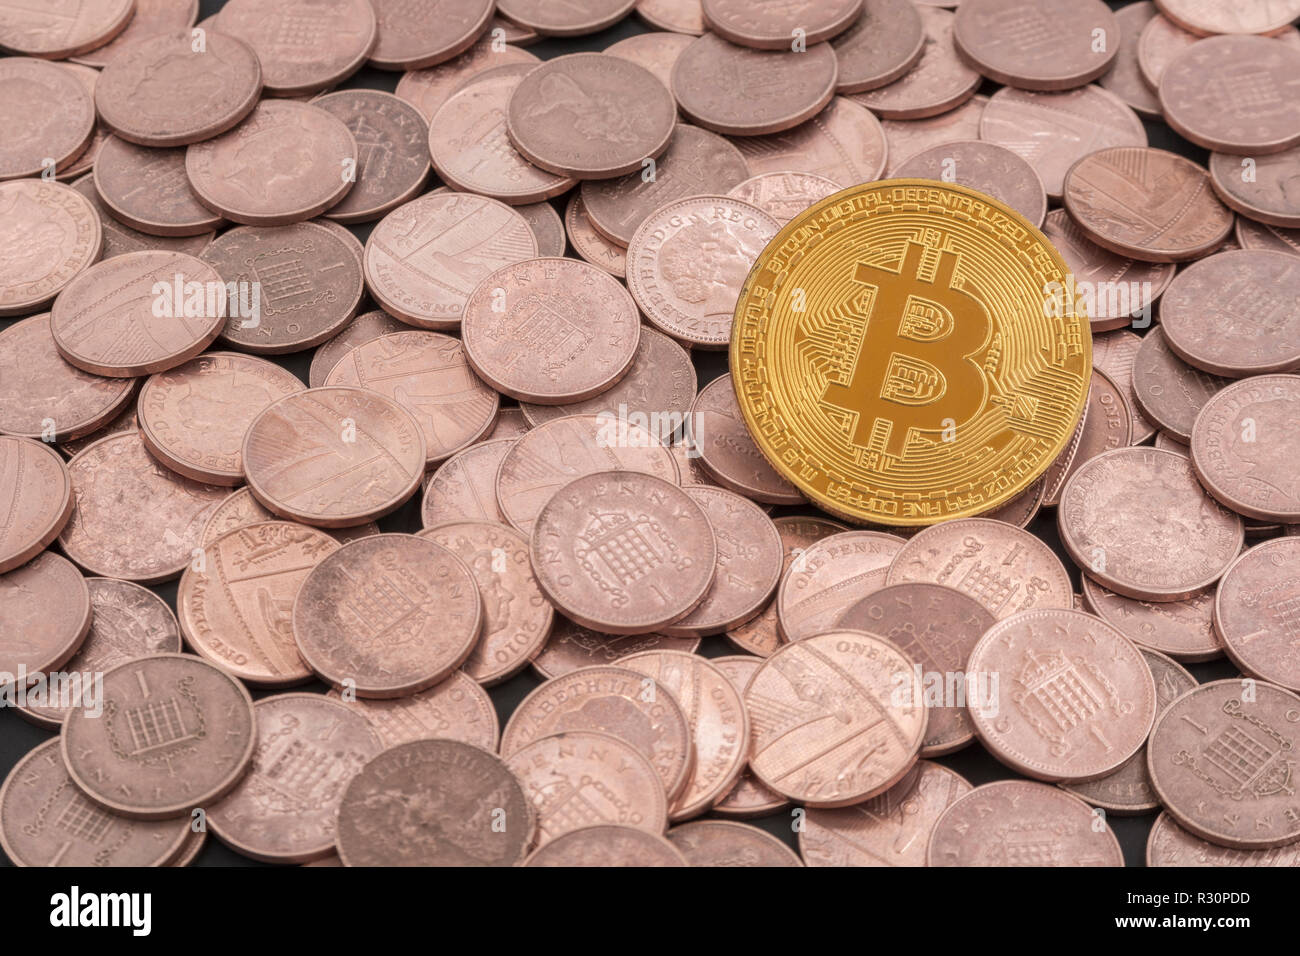 Concept picture for 2018 Bitcoin price collapse, cryptocurrency market crash, 2021 Bitcoin price crash, Bitcoin worth pennies. Stock Photo